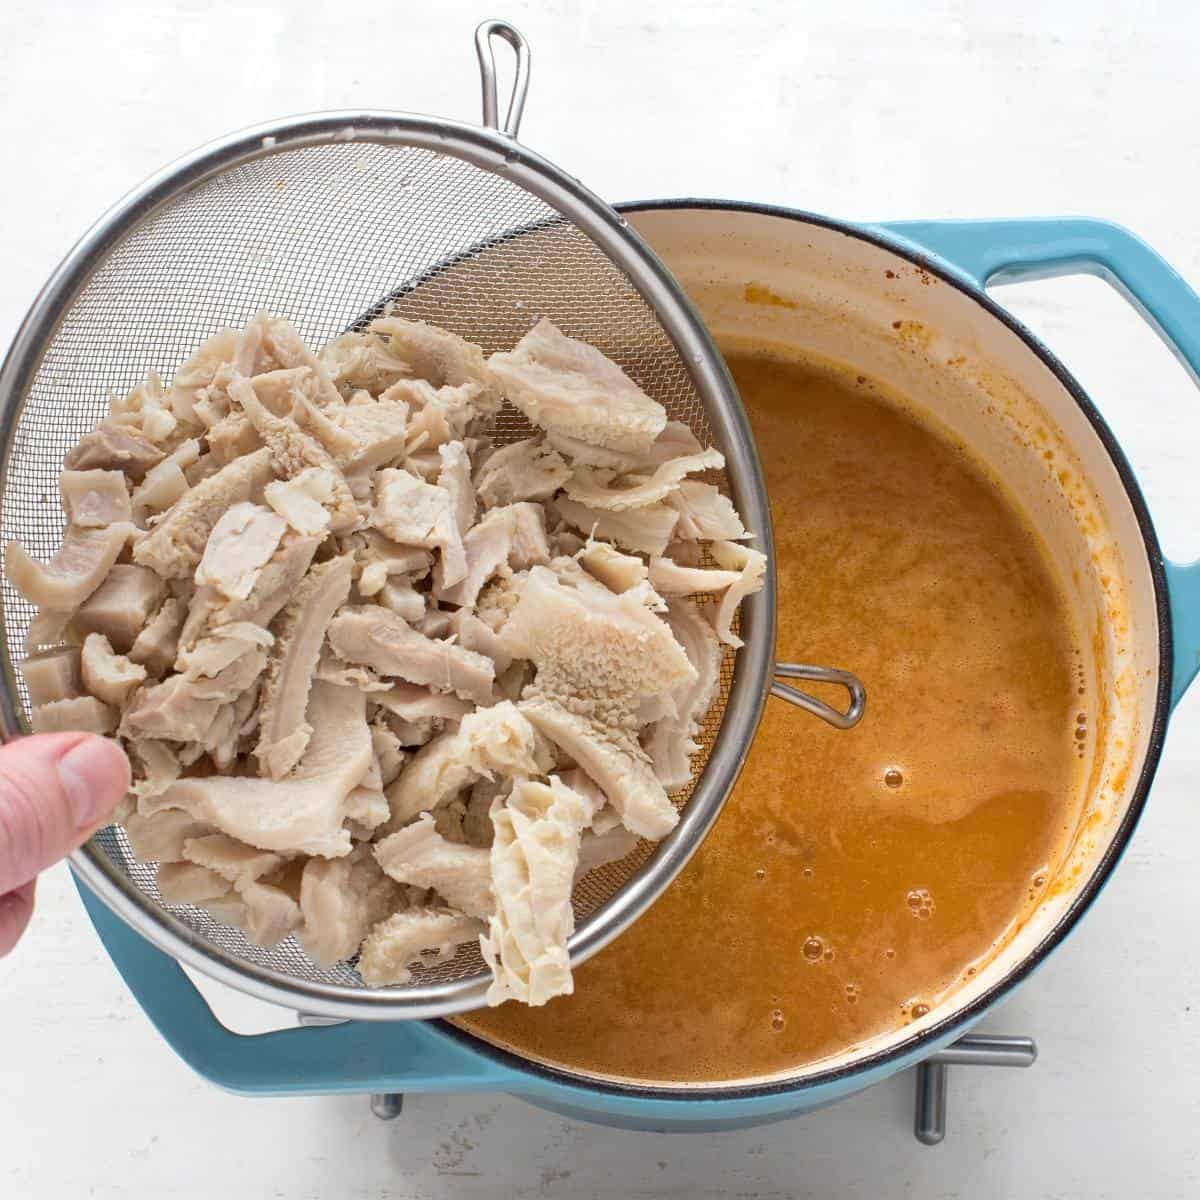 Adding strips of tripe to a blue pot of soup.